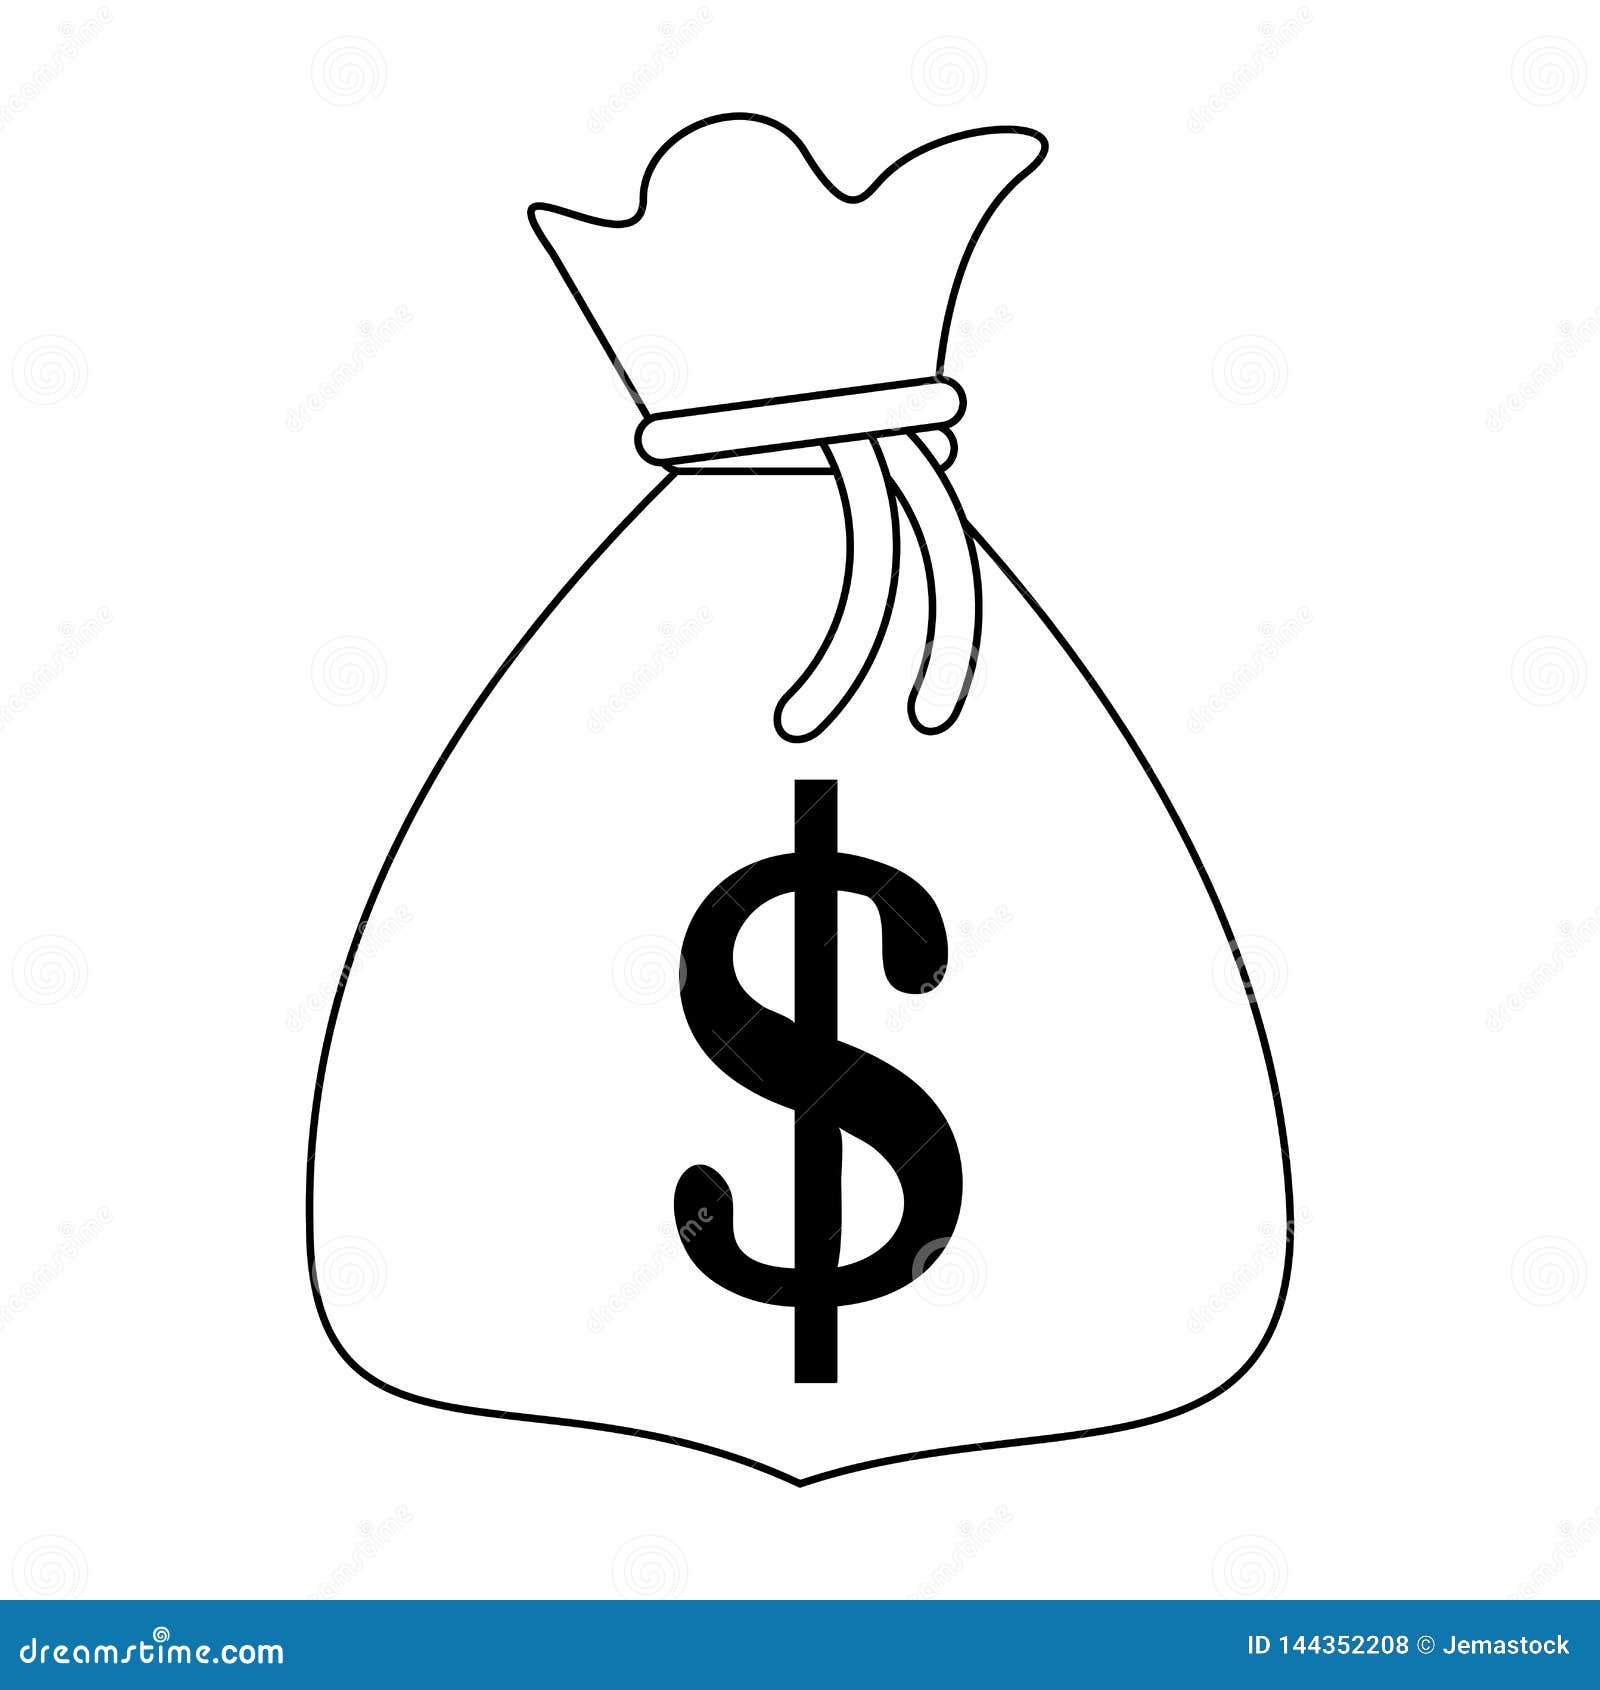 Money Bag Sack Isolated Symbol in Black and White Stock Vector ...